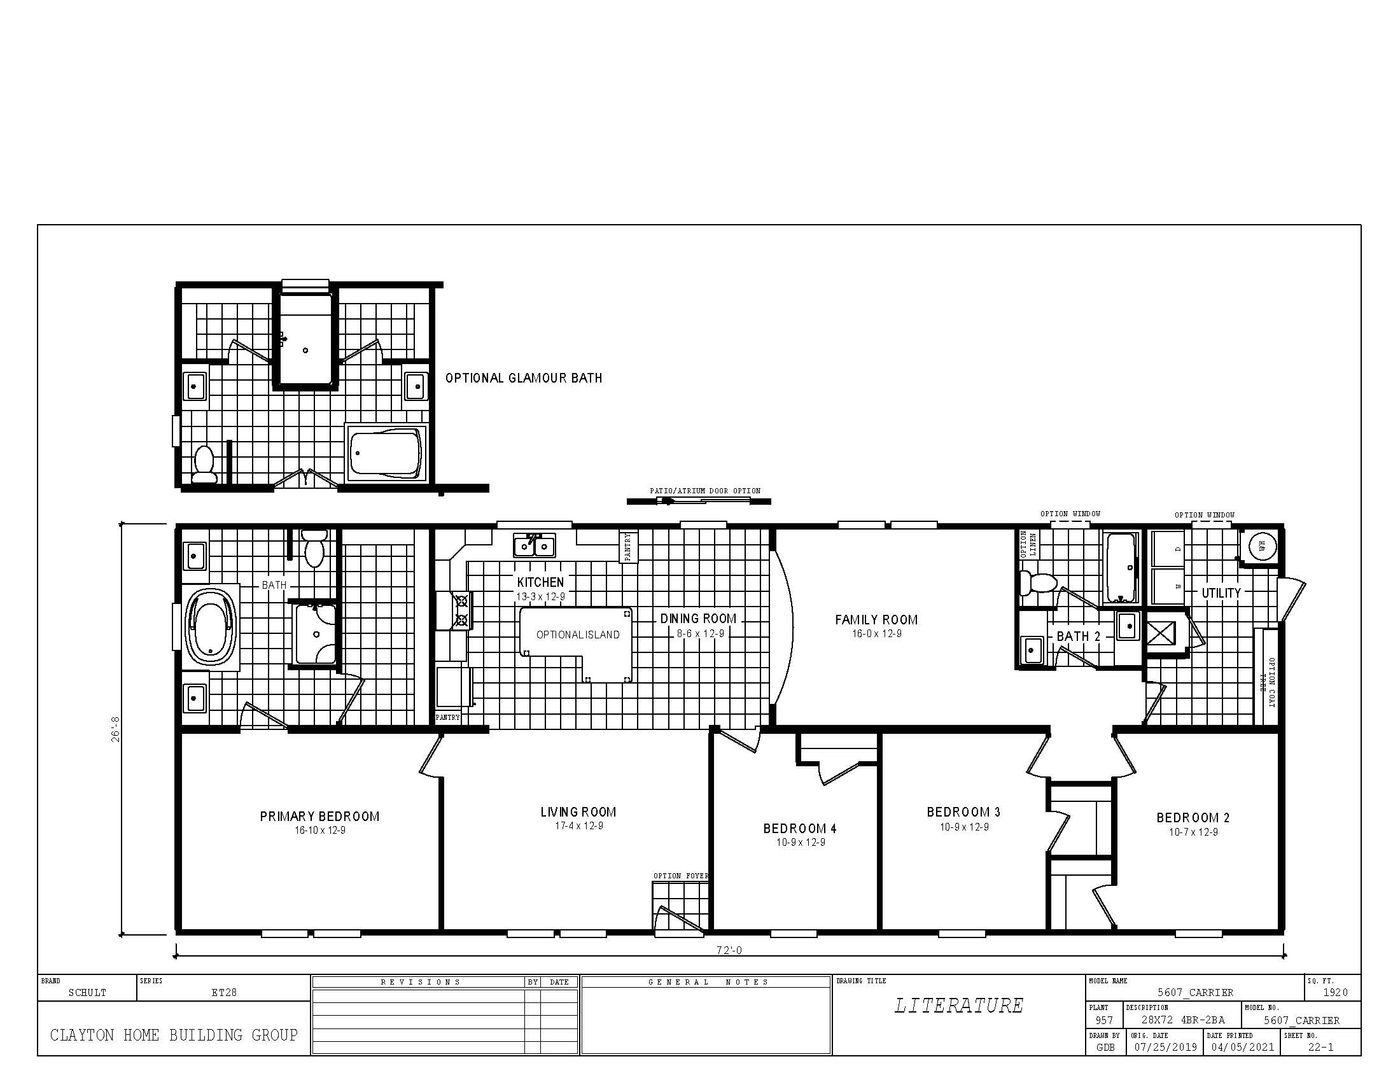 The 5607 ENTERPRISE 7228 Floor Plan. This Manufactured Mobile Home features 4 bedrooms and 2 baths.